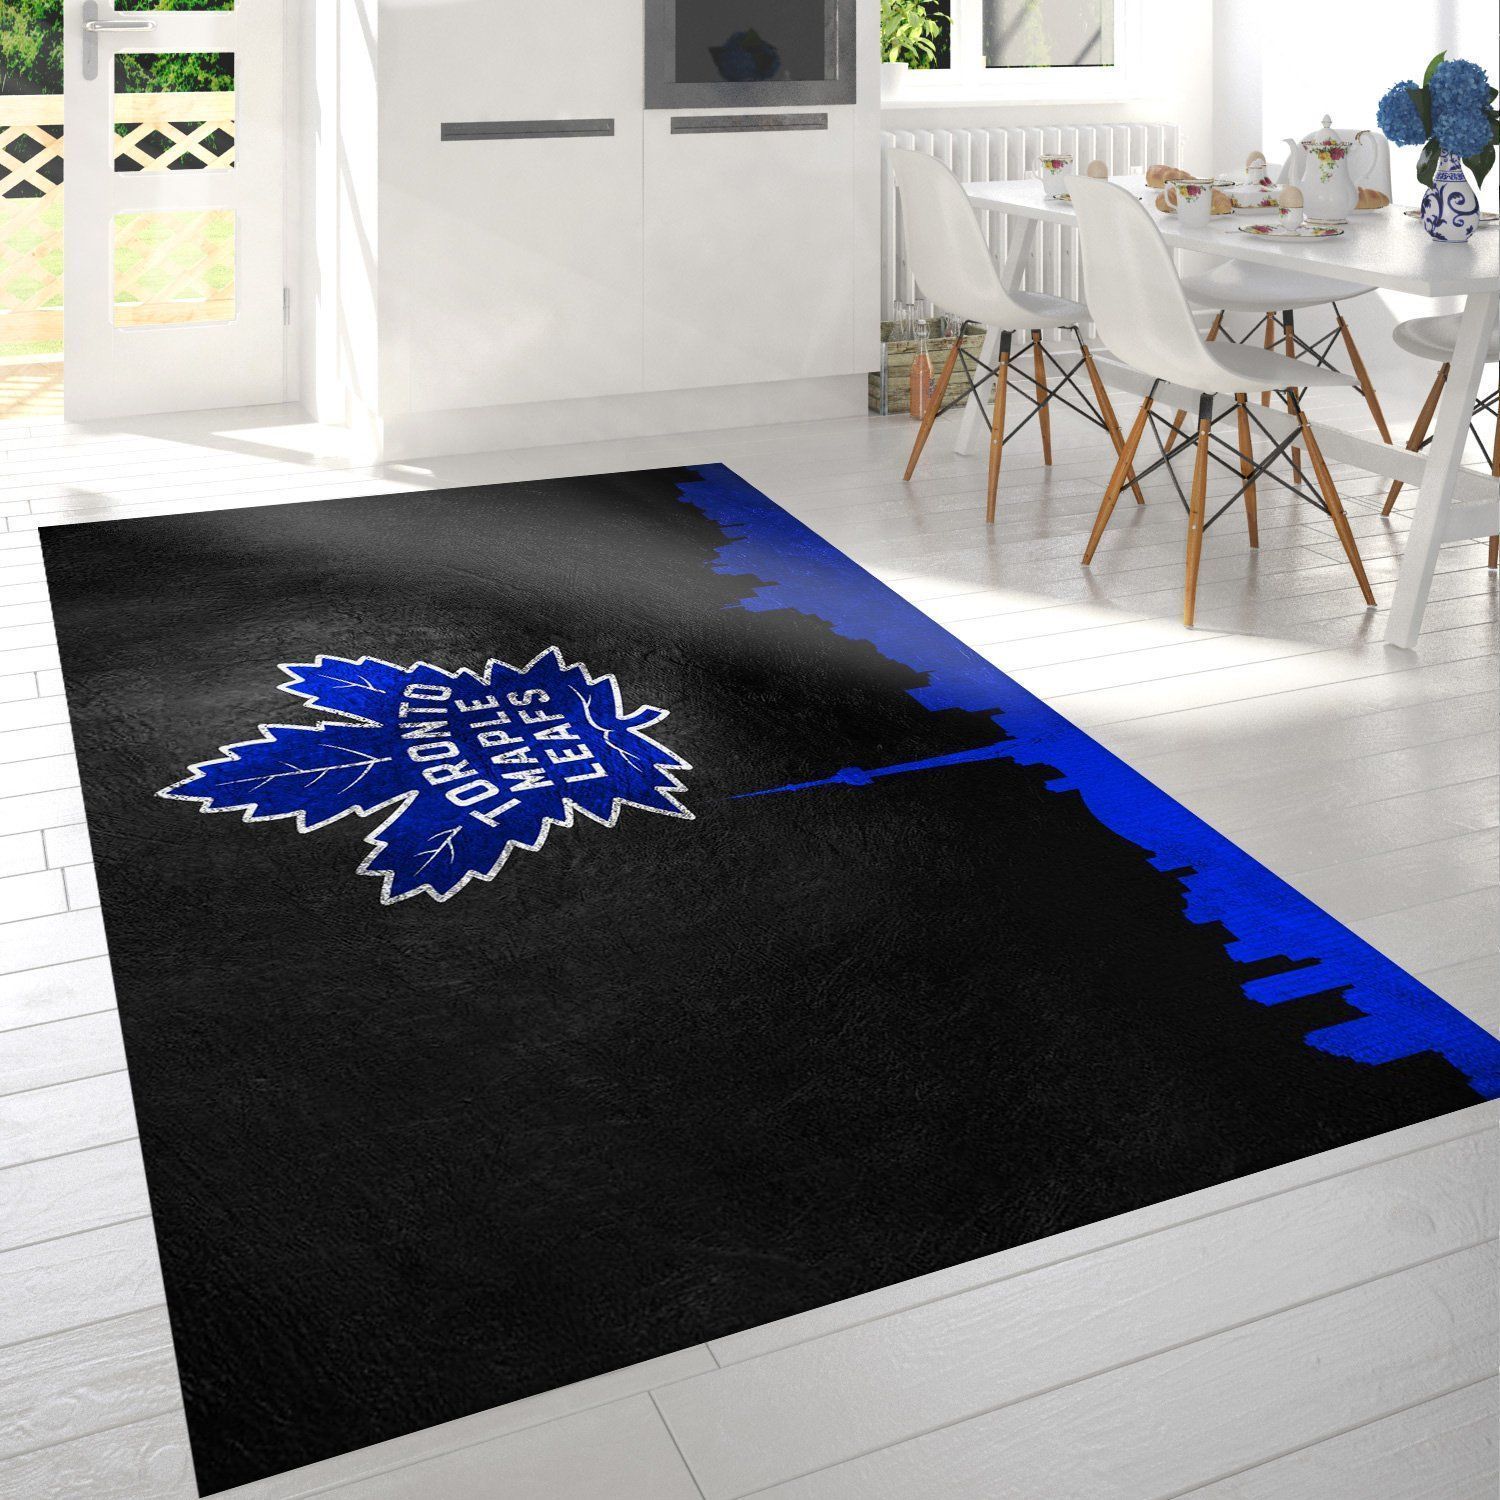 Toronto Maple Leafs Nfl Area Rug Living Room Rug Home US Decor - Indoor Outdoor Rugs